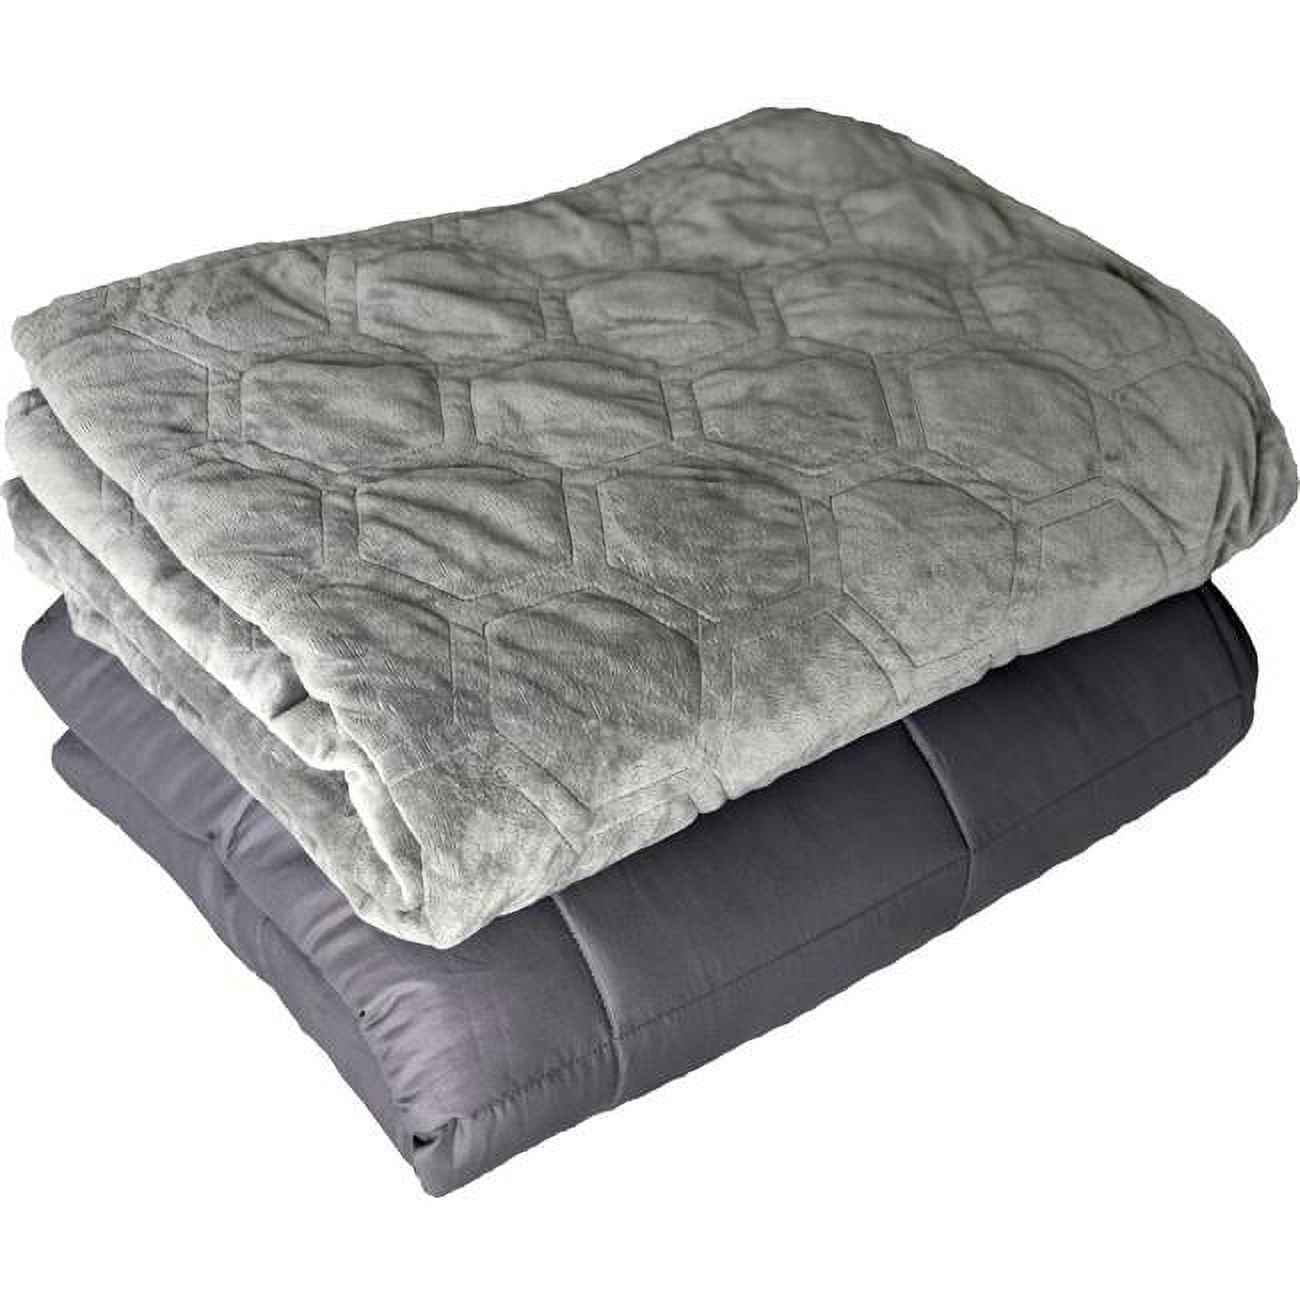 Dcwb15-hc-ws 60 X 80 In. 15 Lbs Weighted Blanket With Duvet Cover - Gray